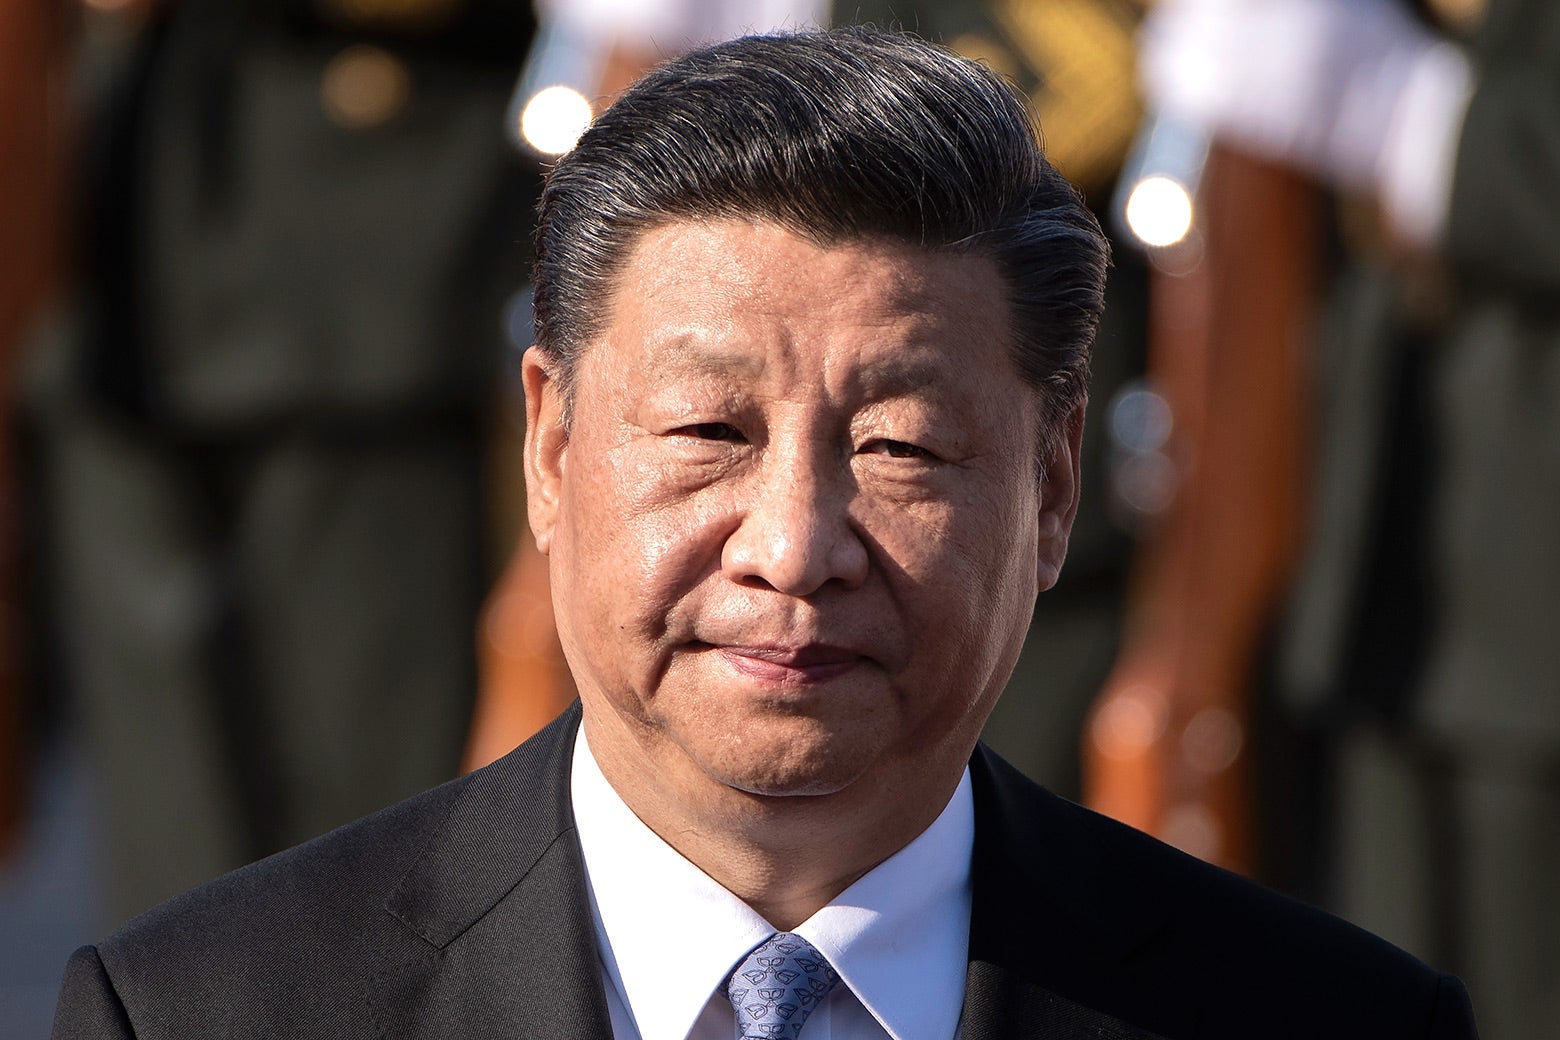 Xi Jinping at a ceremony outside in Beijing.